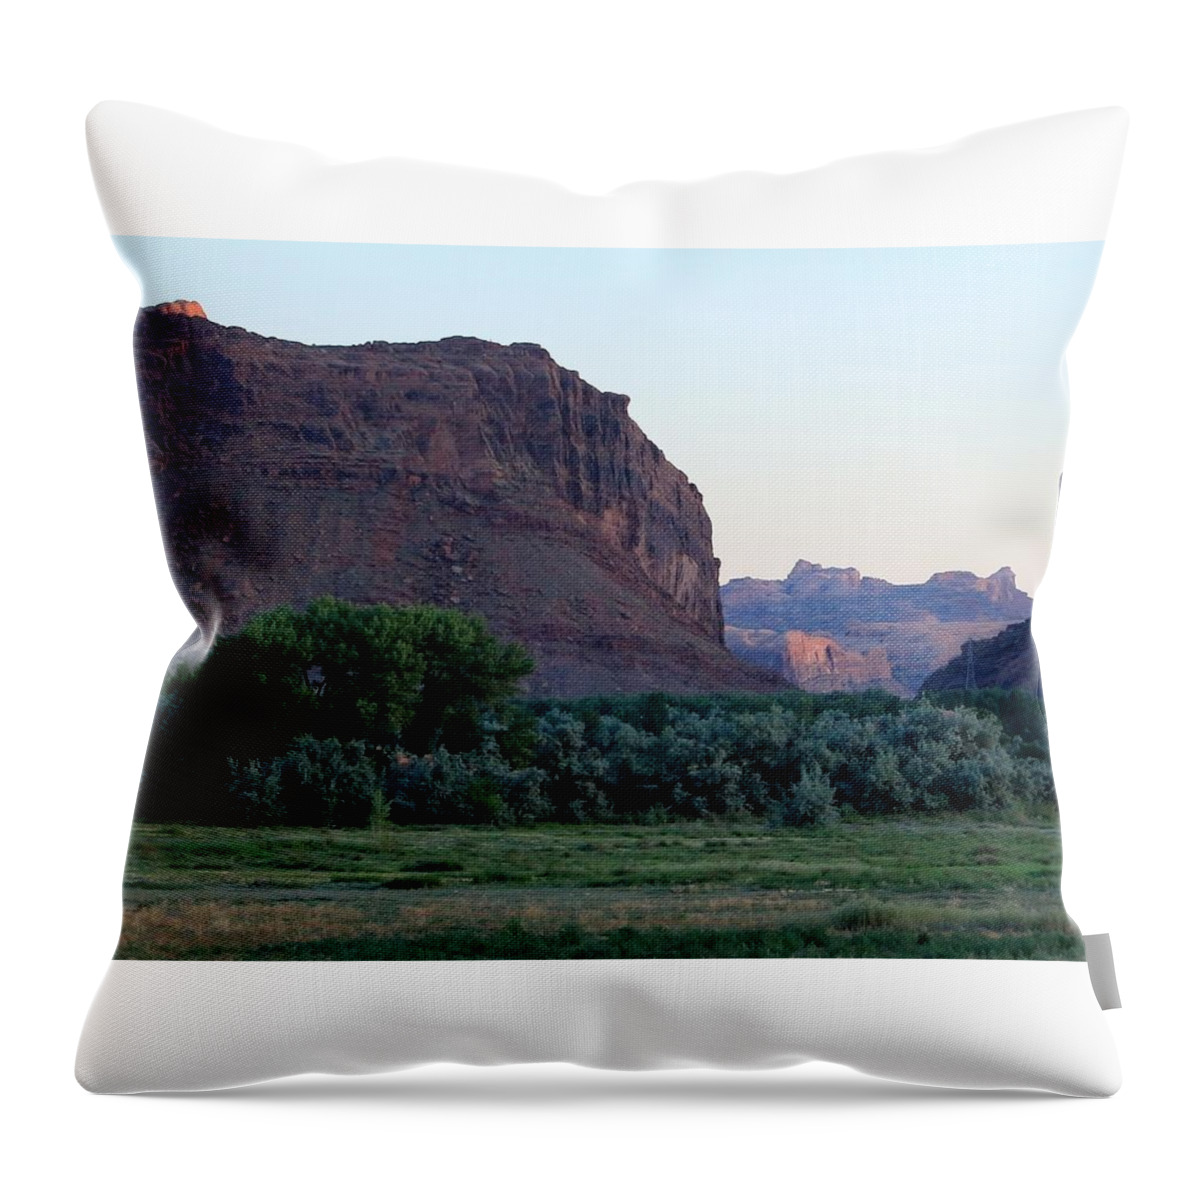 A Throw Pillow featuring the photograph A Moment More by Elizabeth Sullivan